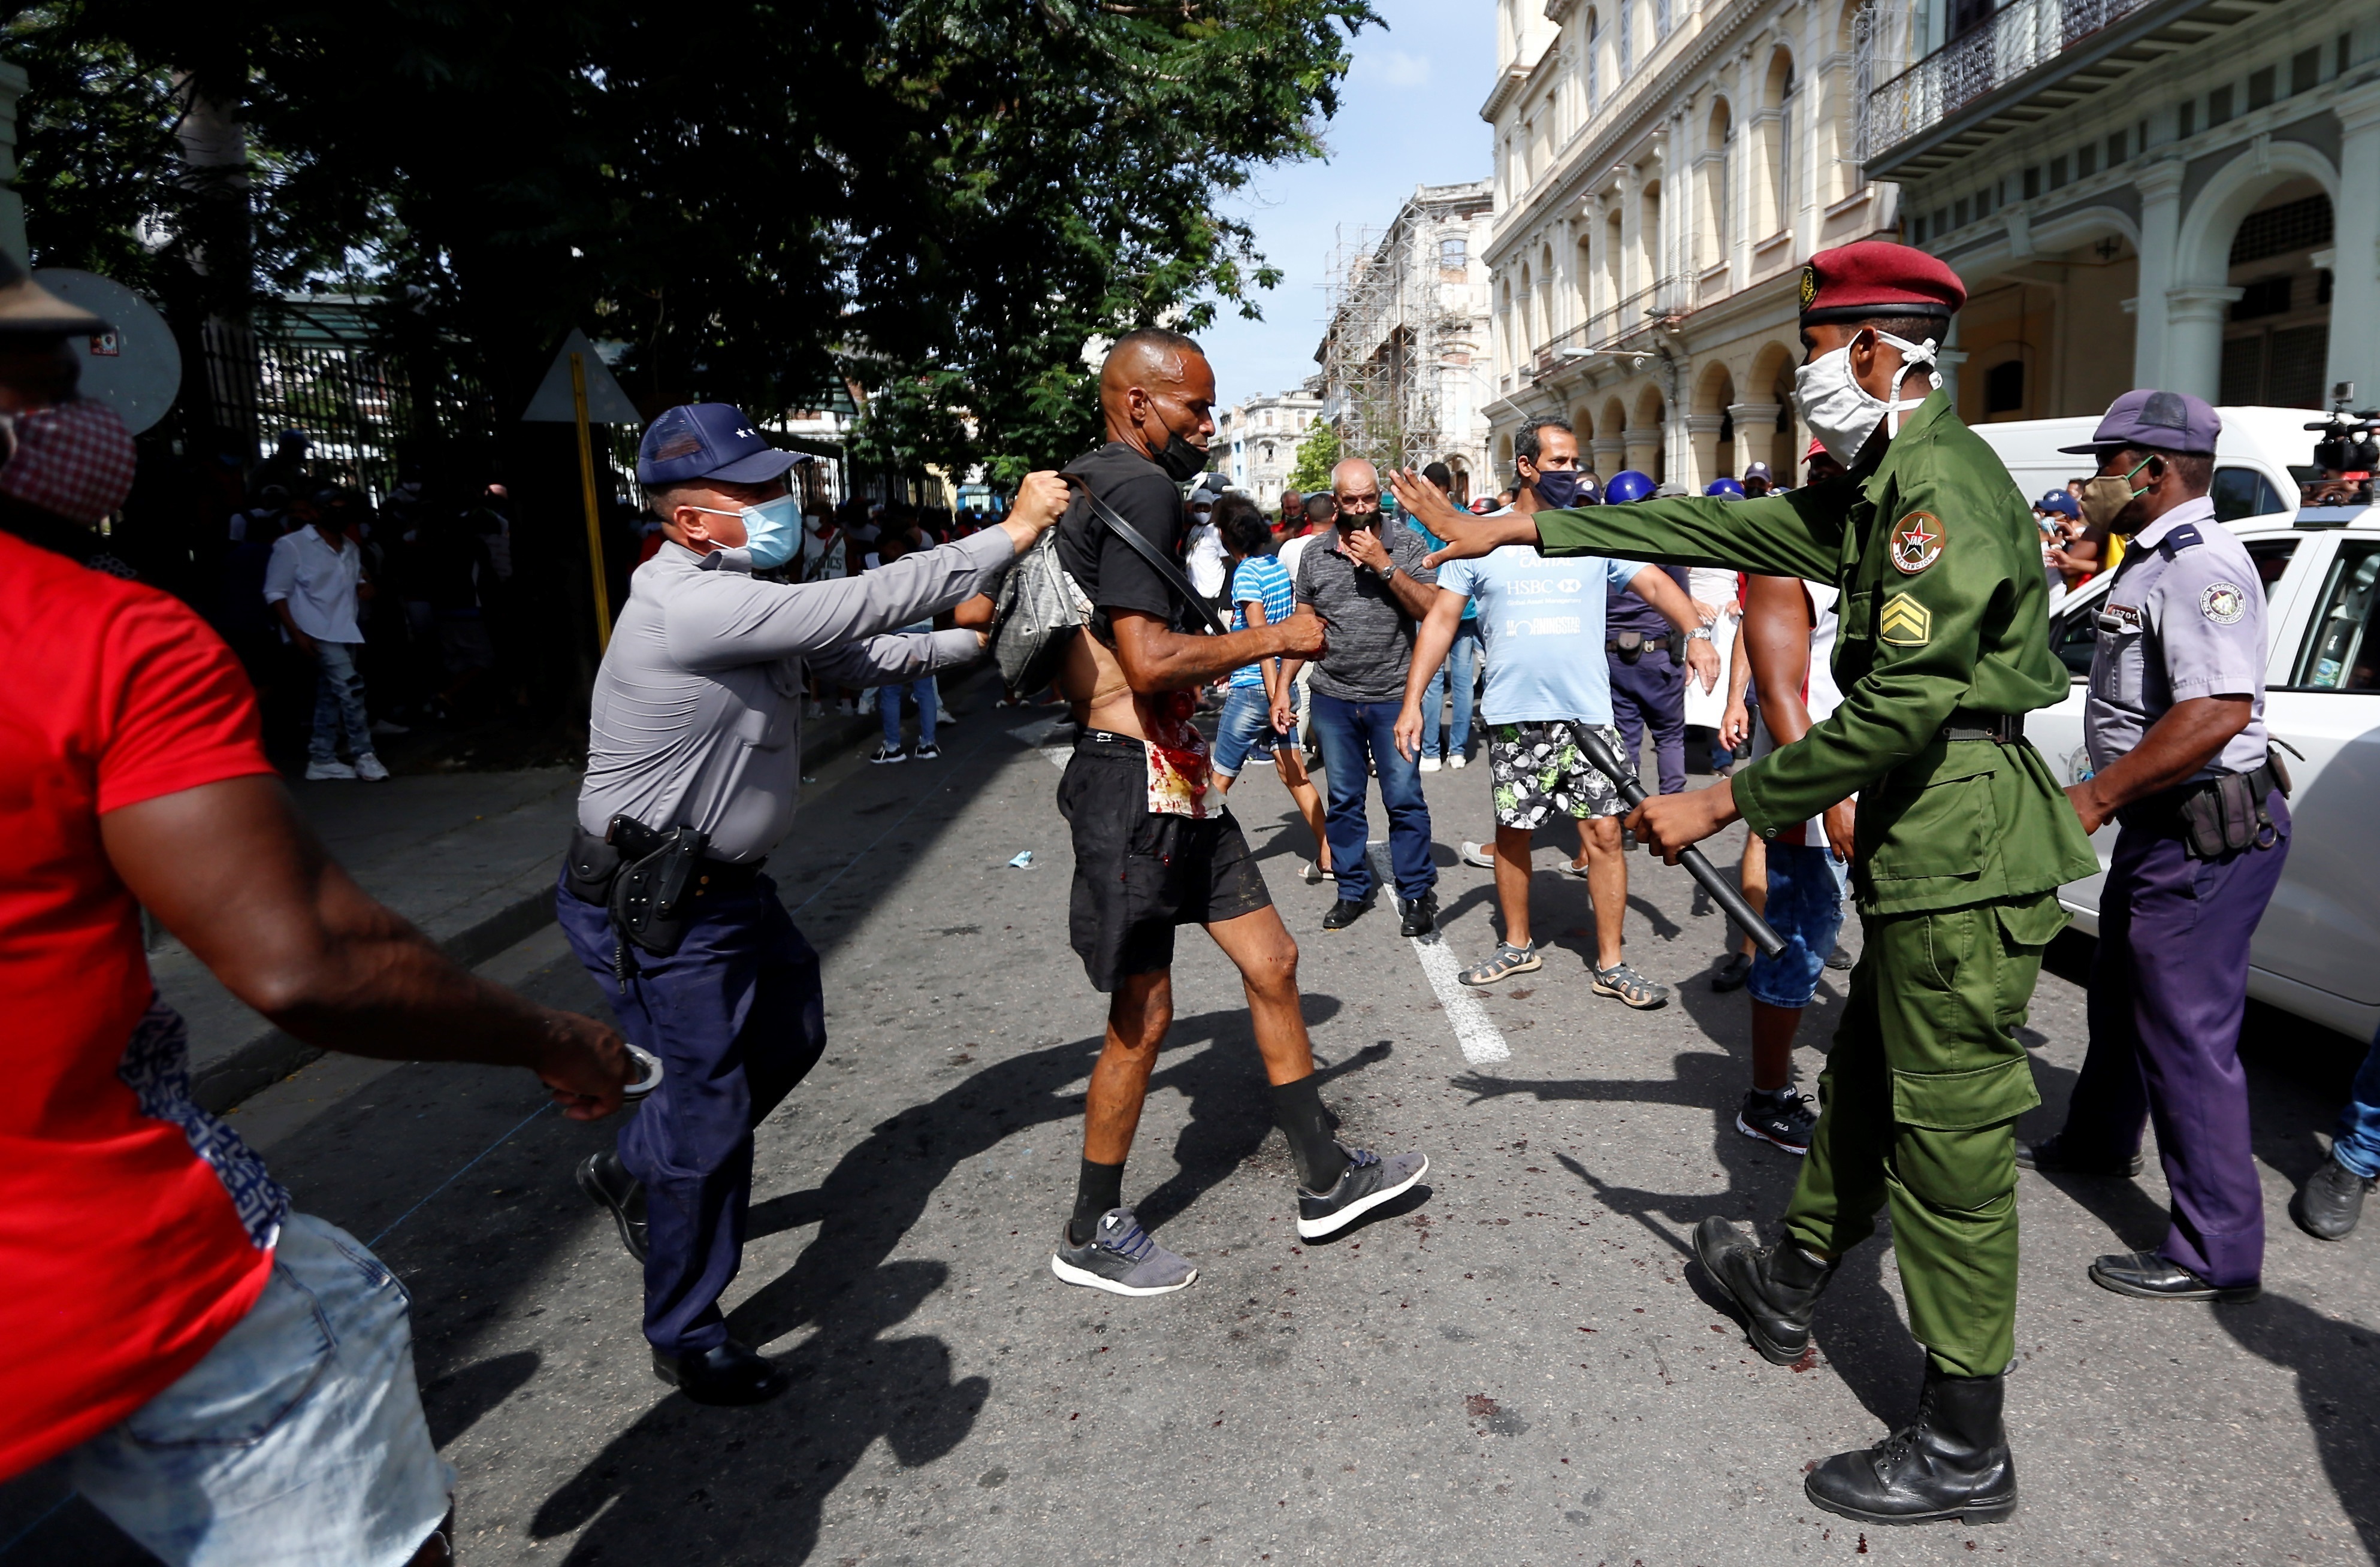 File photo: Police officers arrest a man during an opposition demonstration on July 11, 2021 on a street in Havana, Cuba (EFE/Ernesto Mastrascusa)